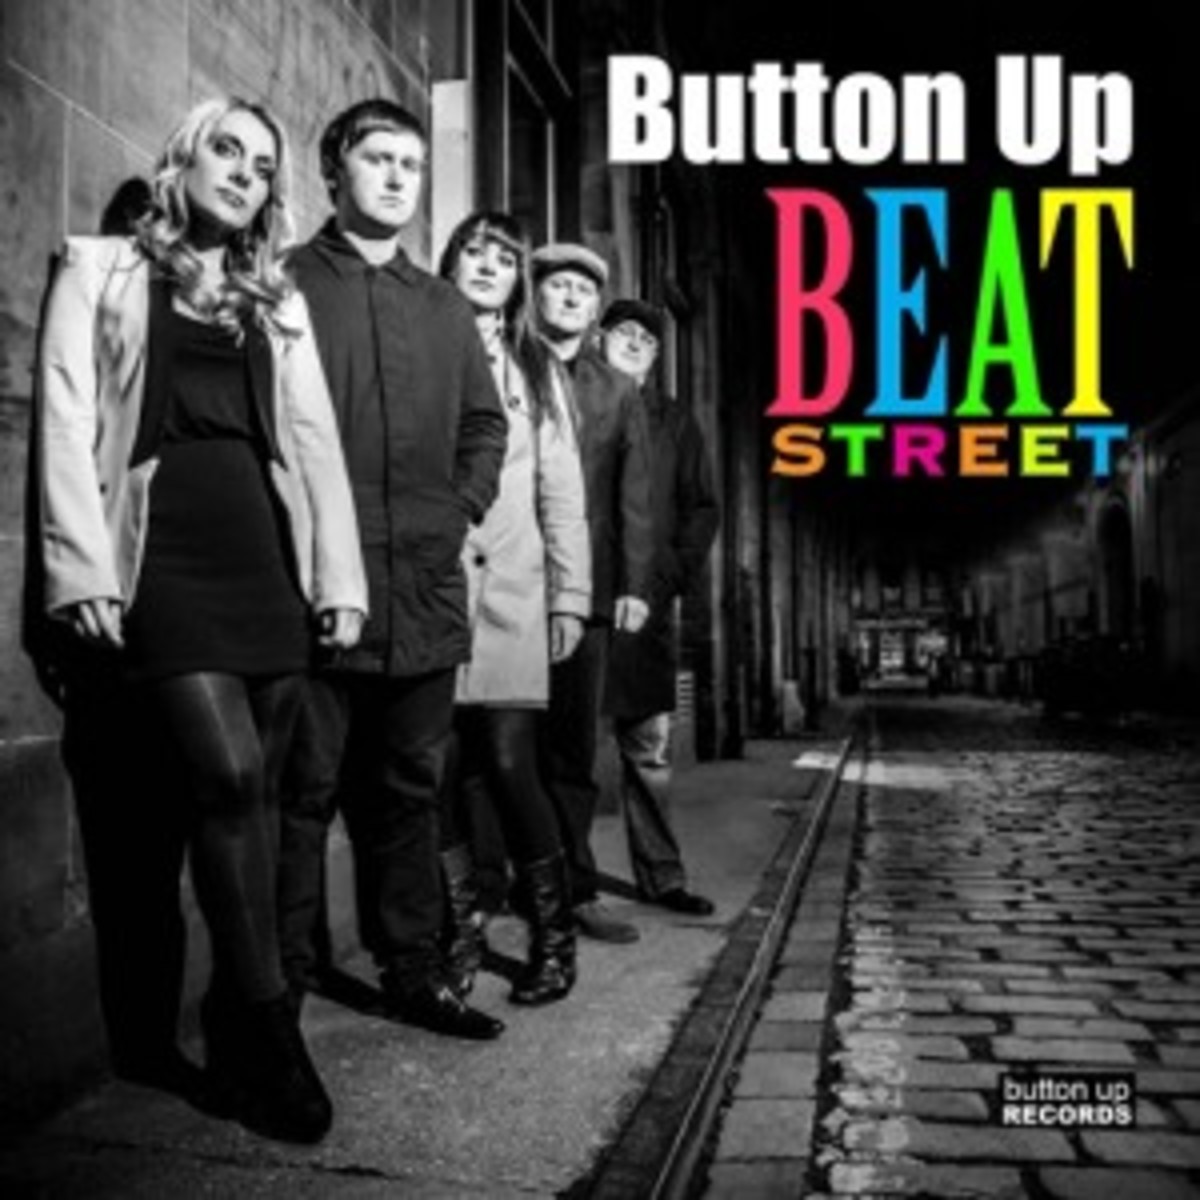 Beat Street, the third album by Glasgow-based Mod revival band Button Up, features a modern take on the classic Northern Soul sound.